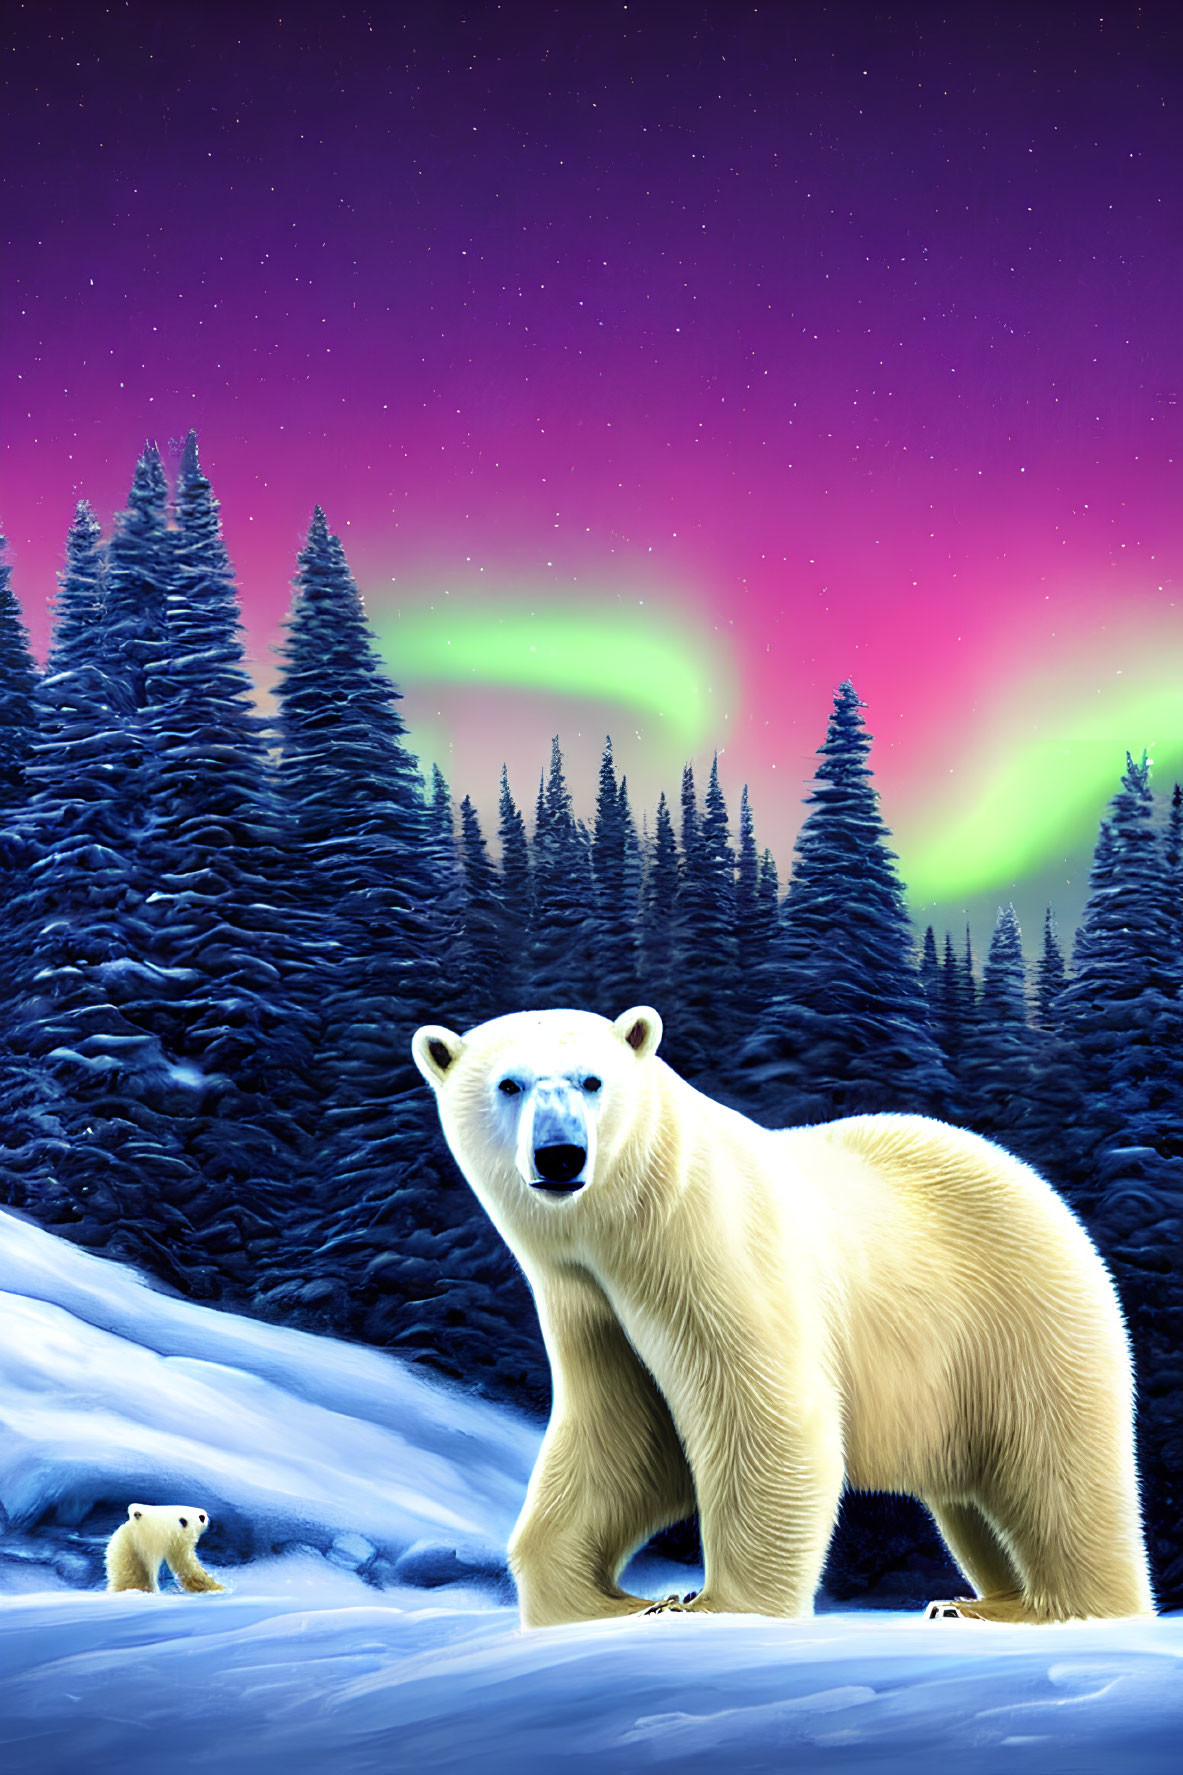 Polar Bear and Cub in Snowy Forest under Northern Lights